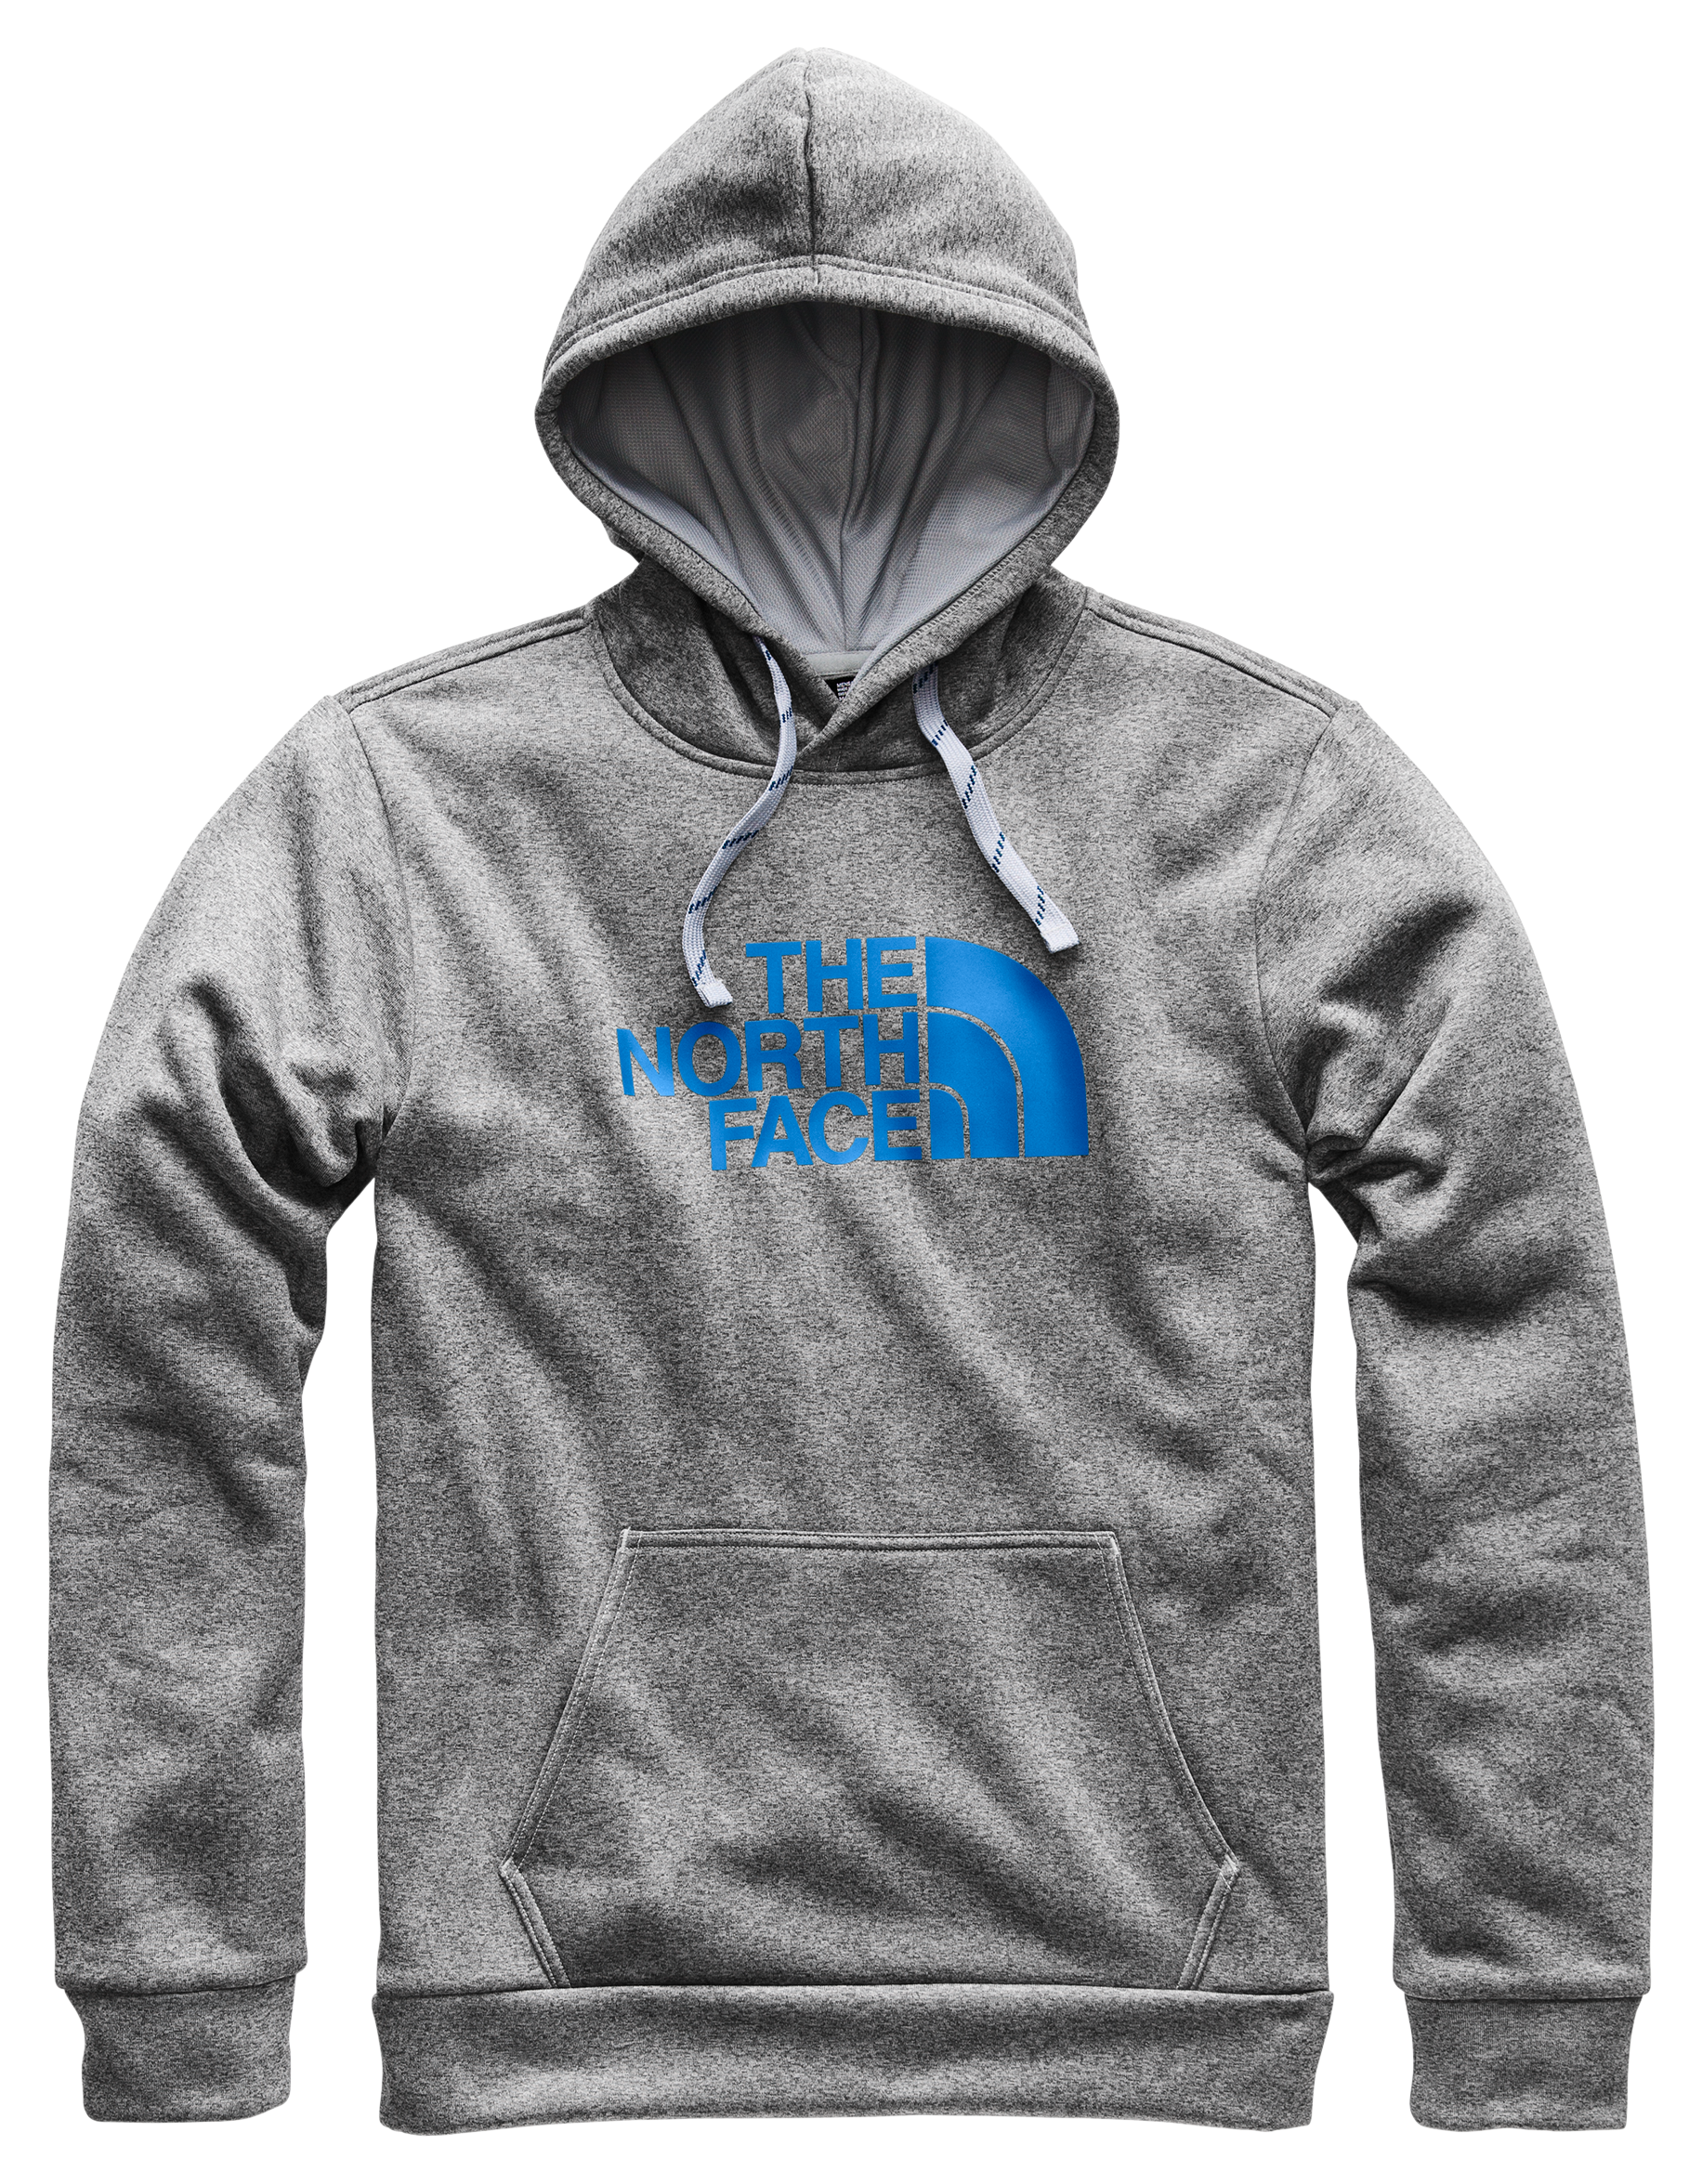 The North Face Surgent Pullover Half Dome Hoodie 2.0 for Men | Bass Pro ...